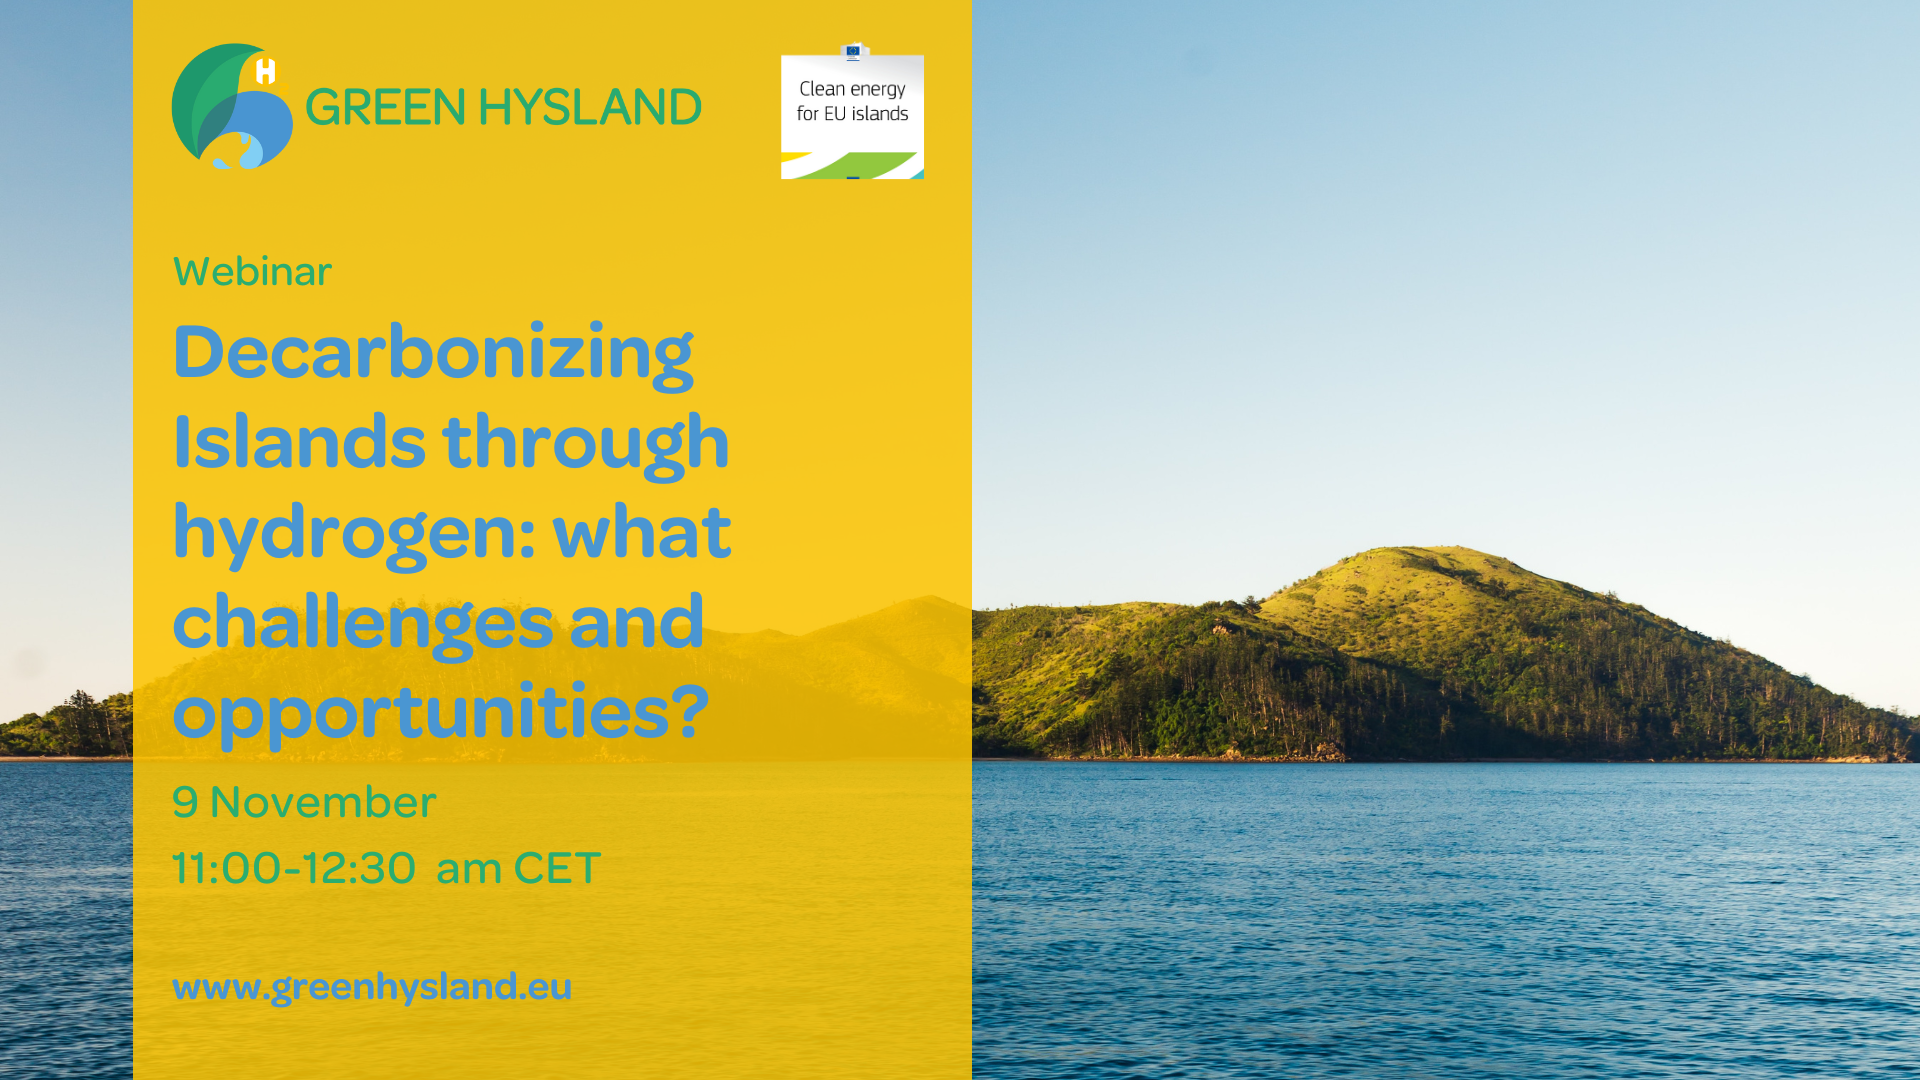 Summary 3rd webinar – “Decarbonizing Islands through hydrogen: what challenges and opportunities?”